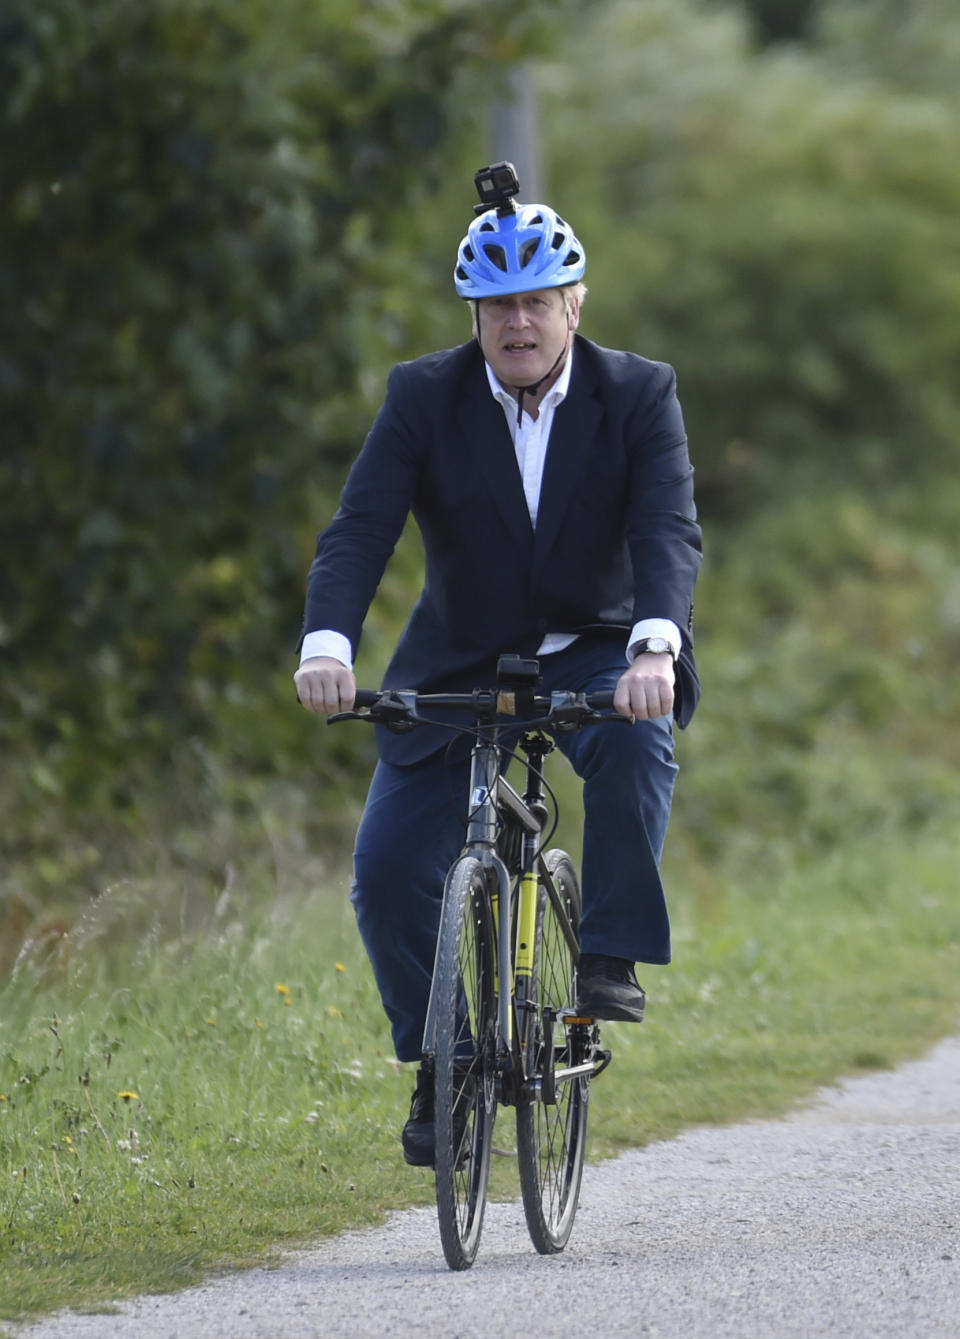 Britain's Prime Minister Boris Johnson cycles at the Canal Side Heritage Centre in Beeston near Nottingham, England, Tuesday, July 28, 2020. The government is launching a new cycling initiative to help get people fitter. (AP Photo/Rui Vieira, Pool)